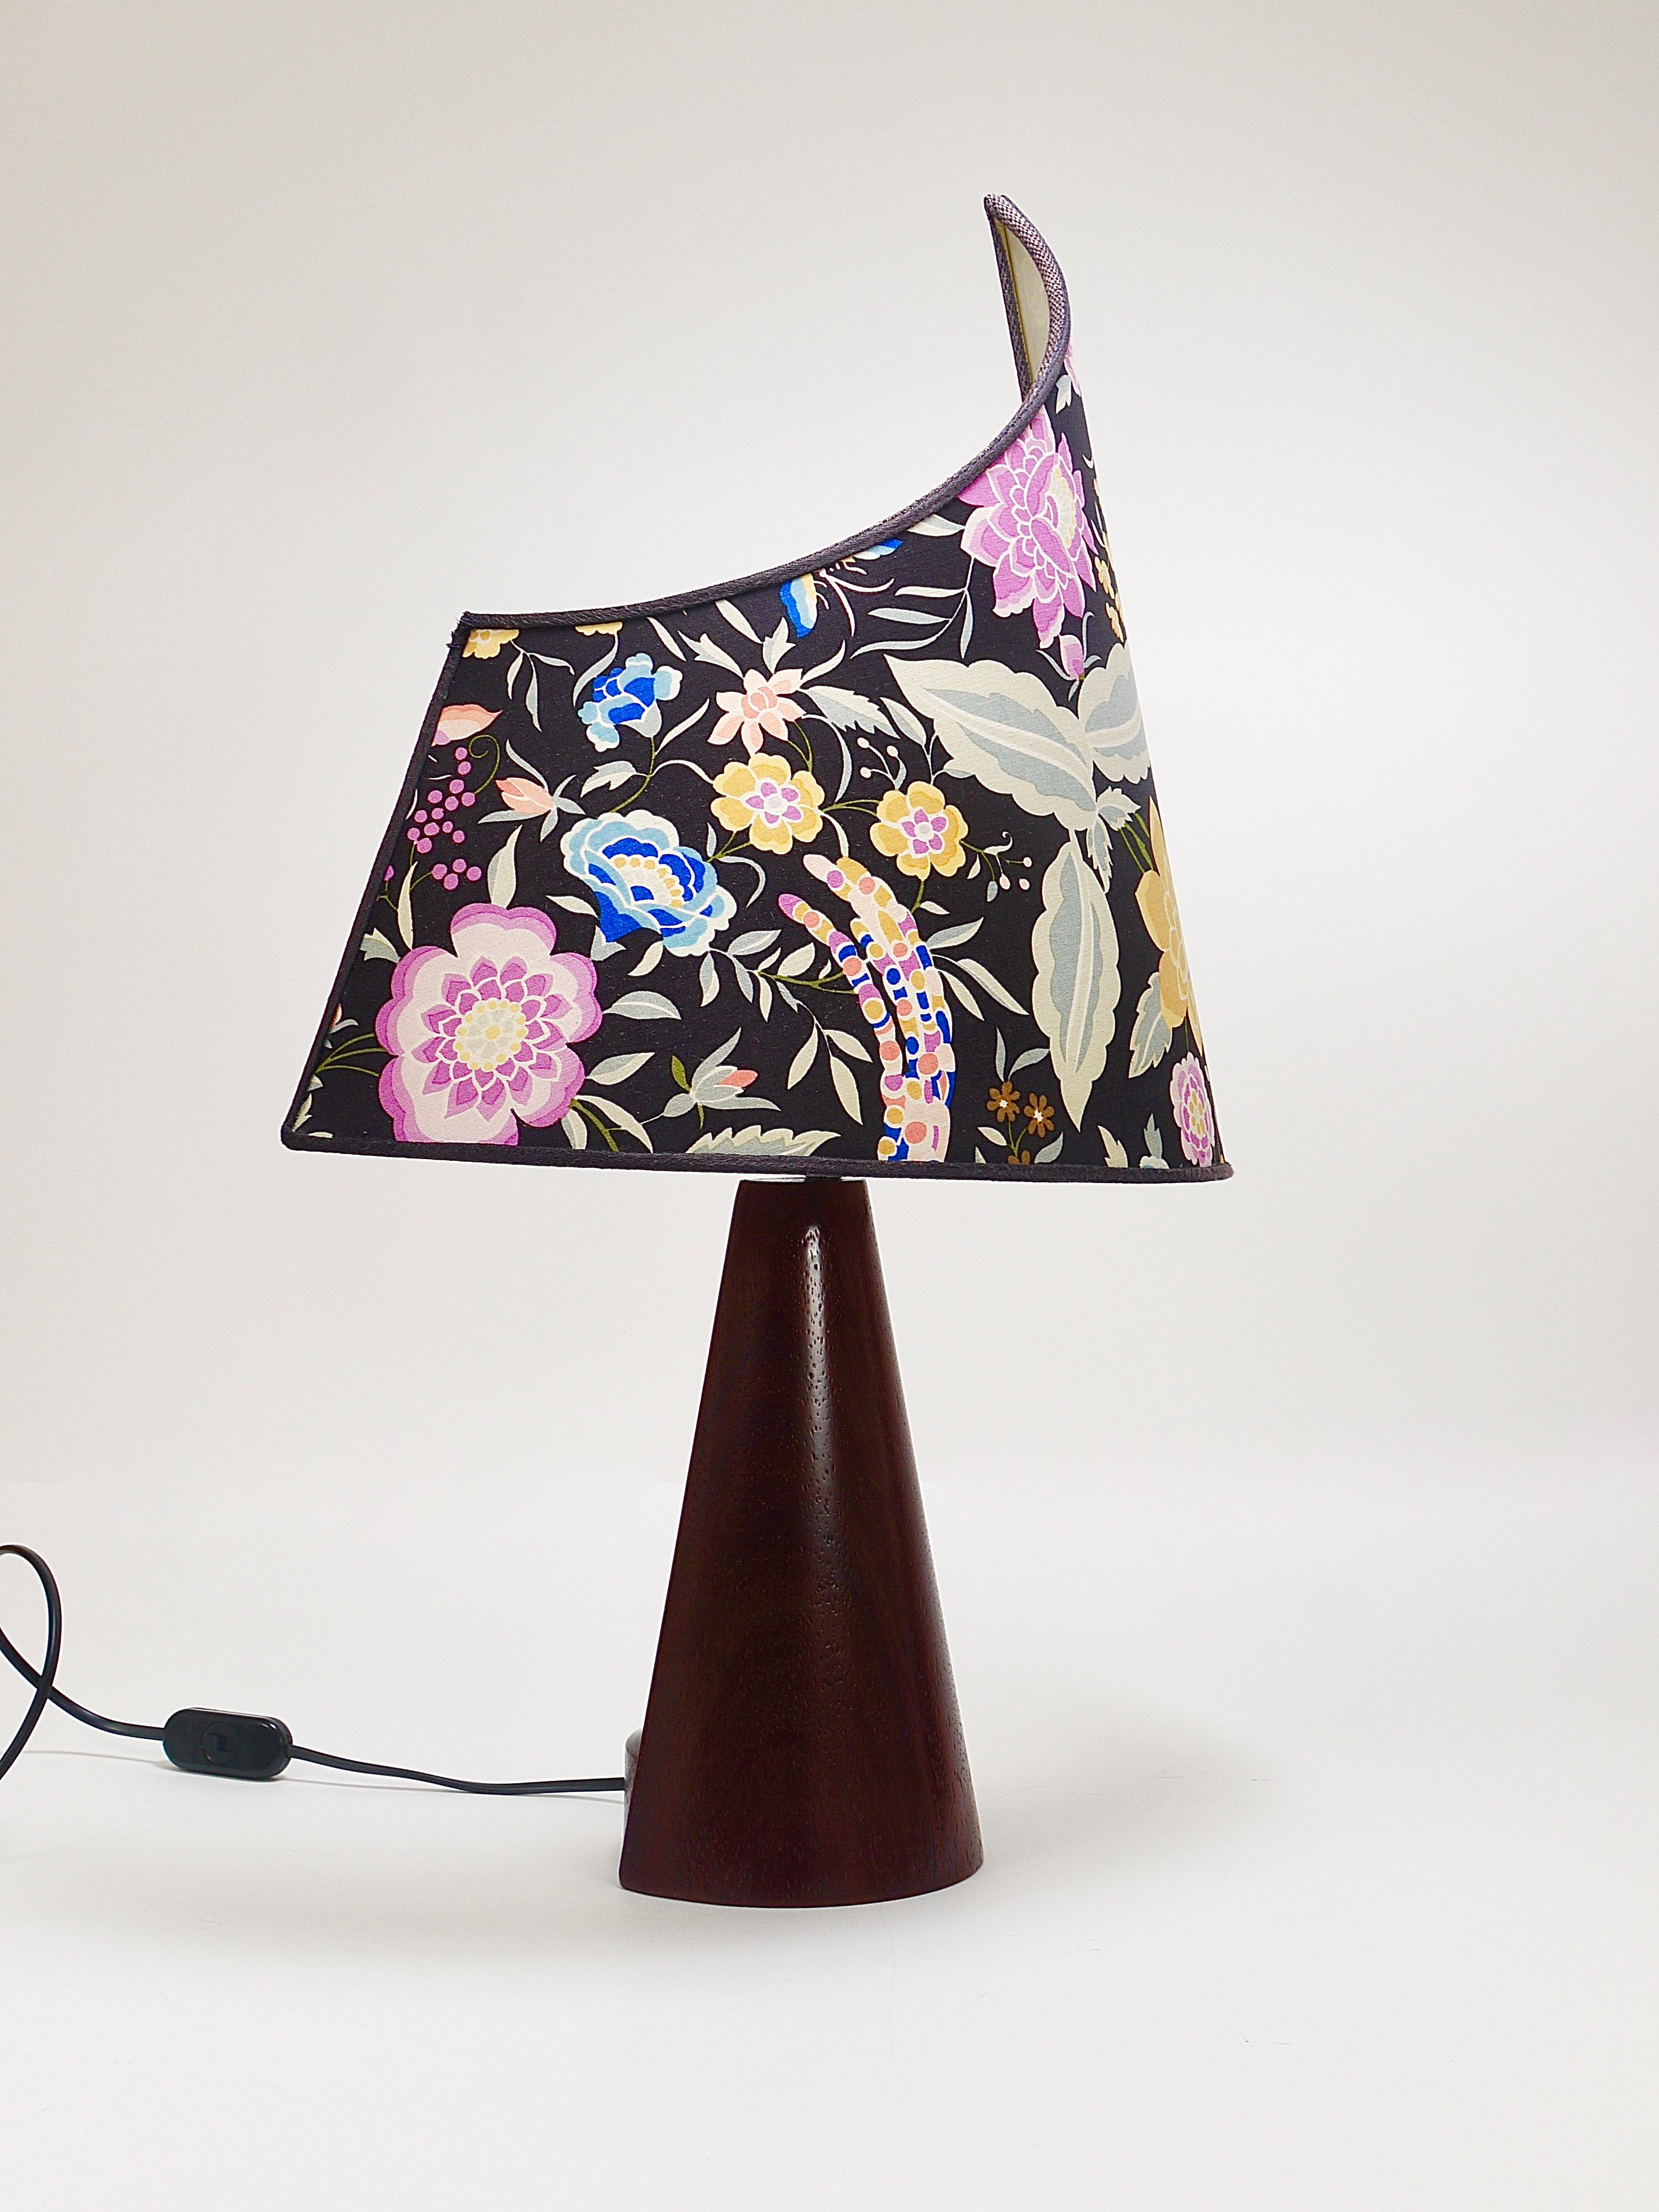 A Pair Missoni Post-Modern Table Side Lamps by Massimo Valloto, Italy, 1980s For Sale 5